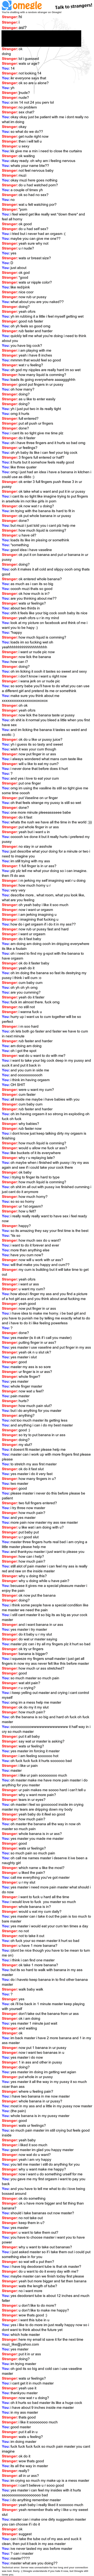 Logs omegle dirty chat Common Interests